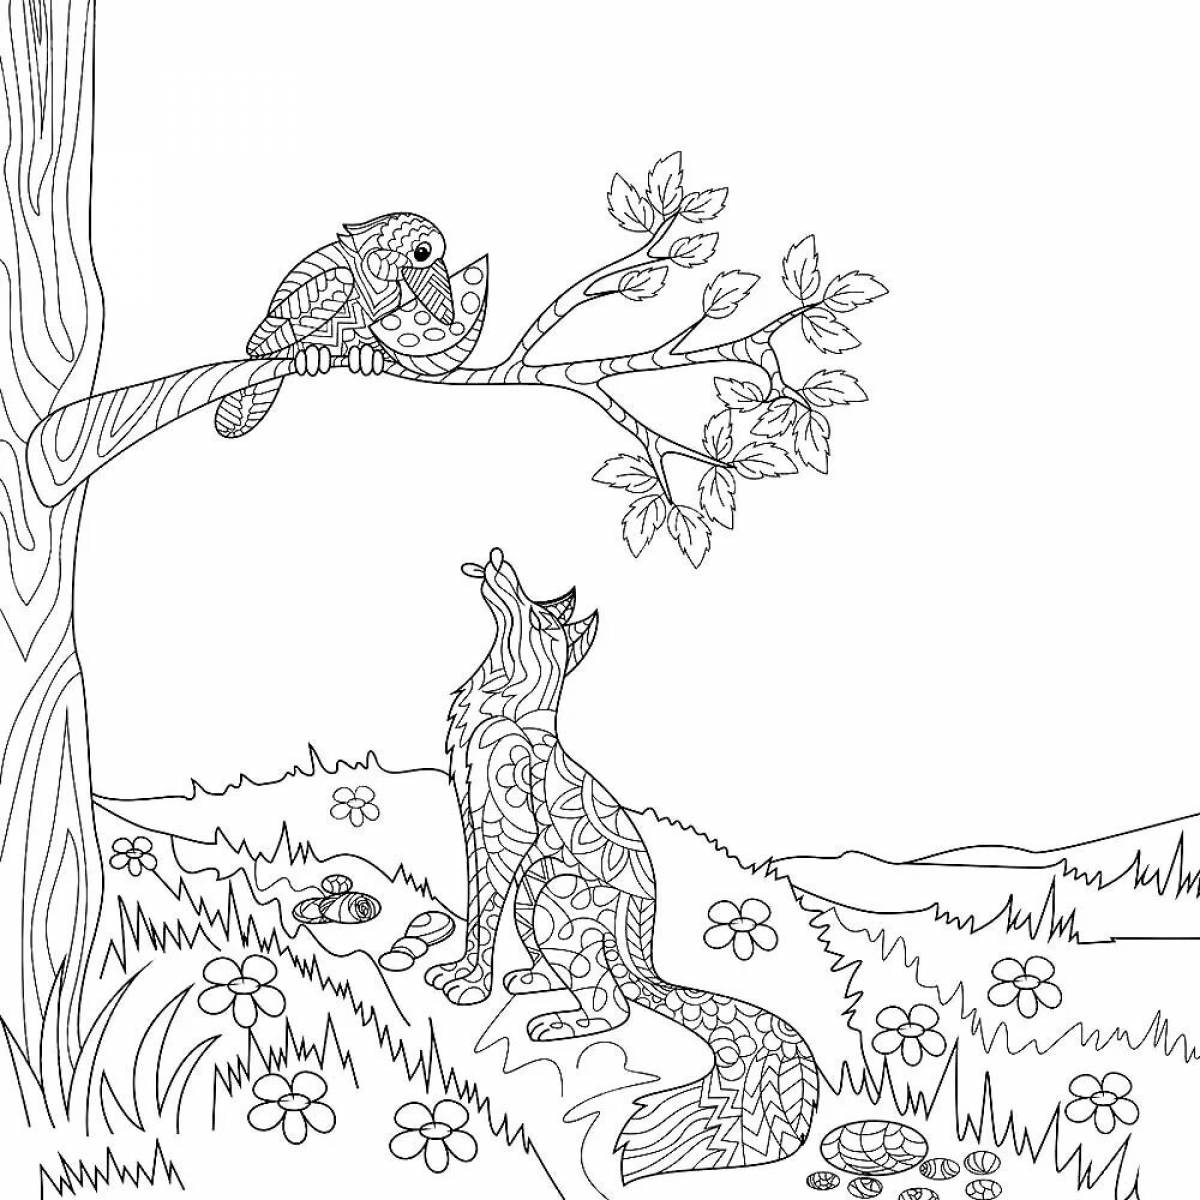 Sparkling grouse and fox coloring page